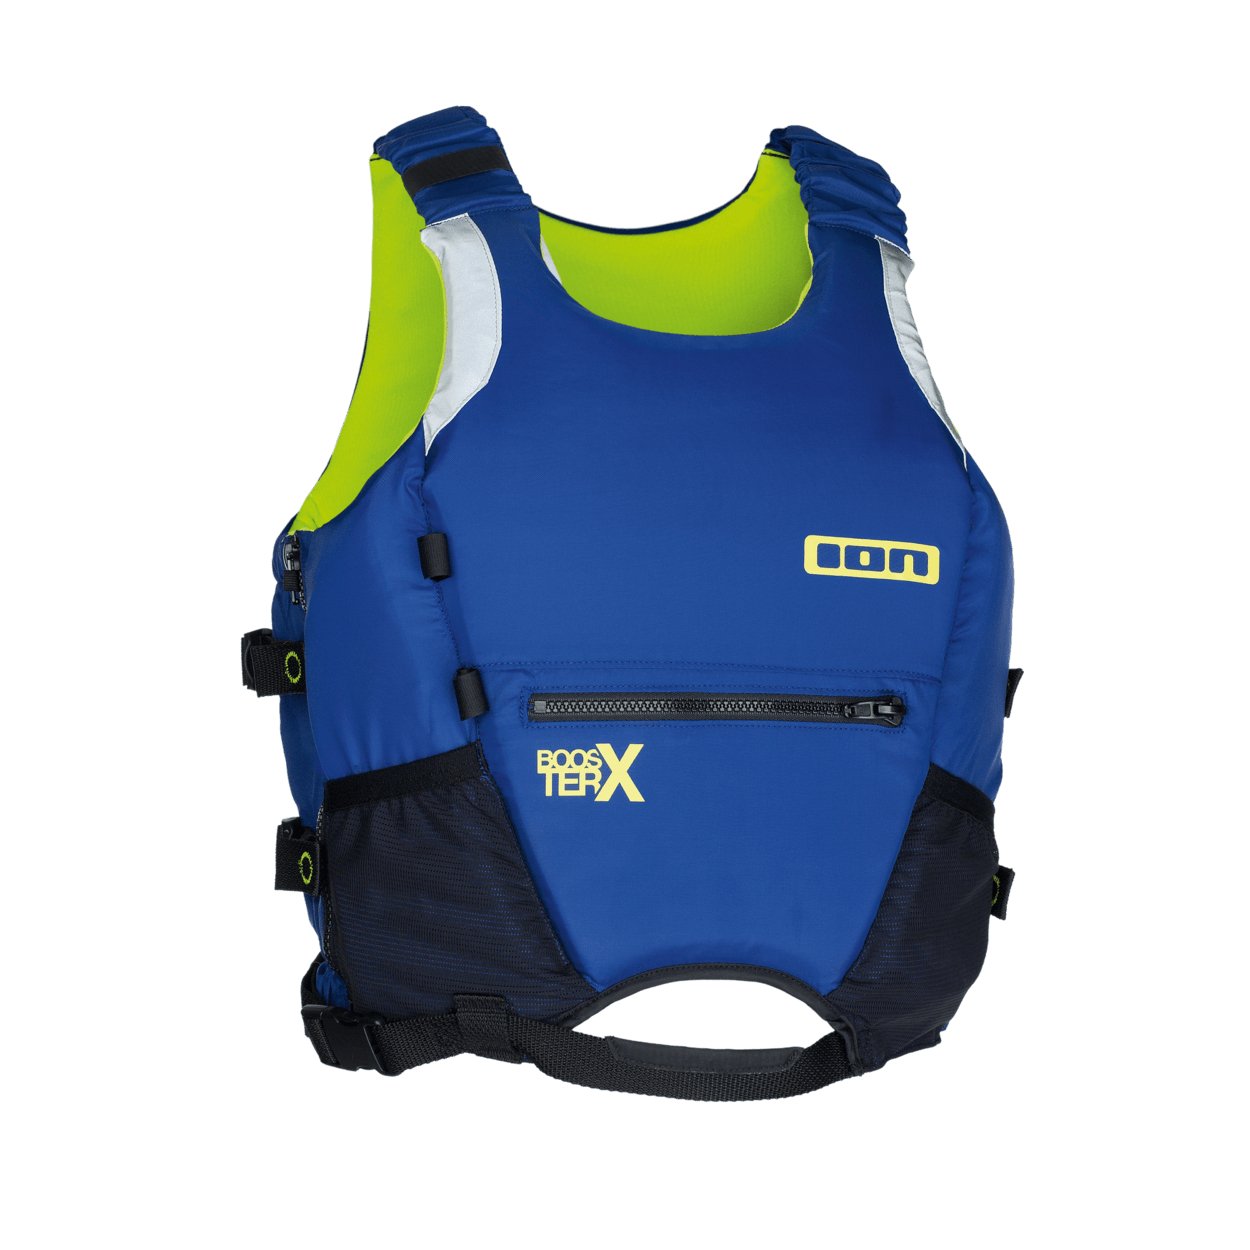 ION Booster Vest 50N SideZip unisex 2022 - Worthing Watersports - 9010583080147 - Protection - ION Water